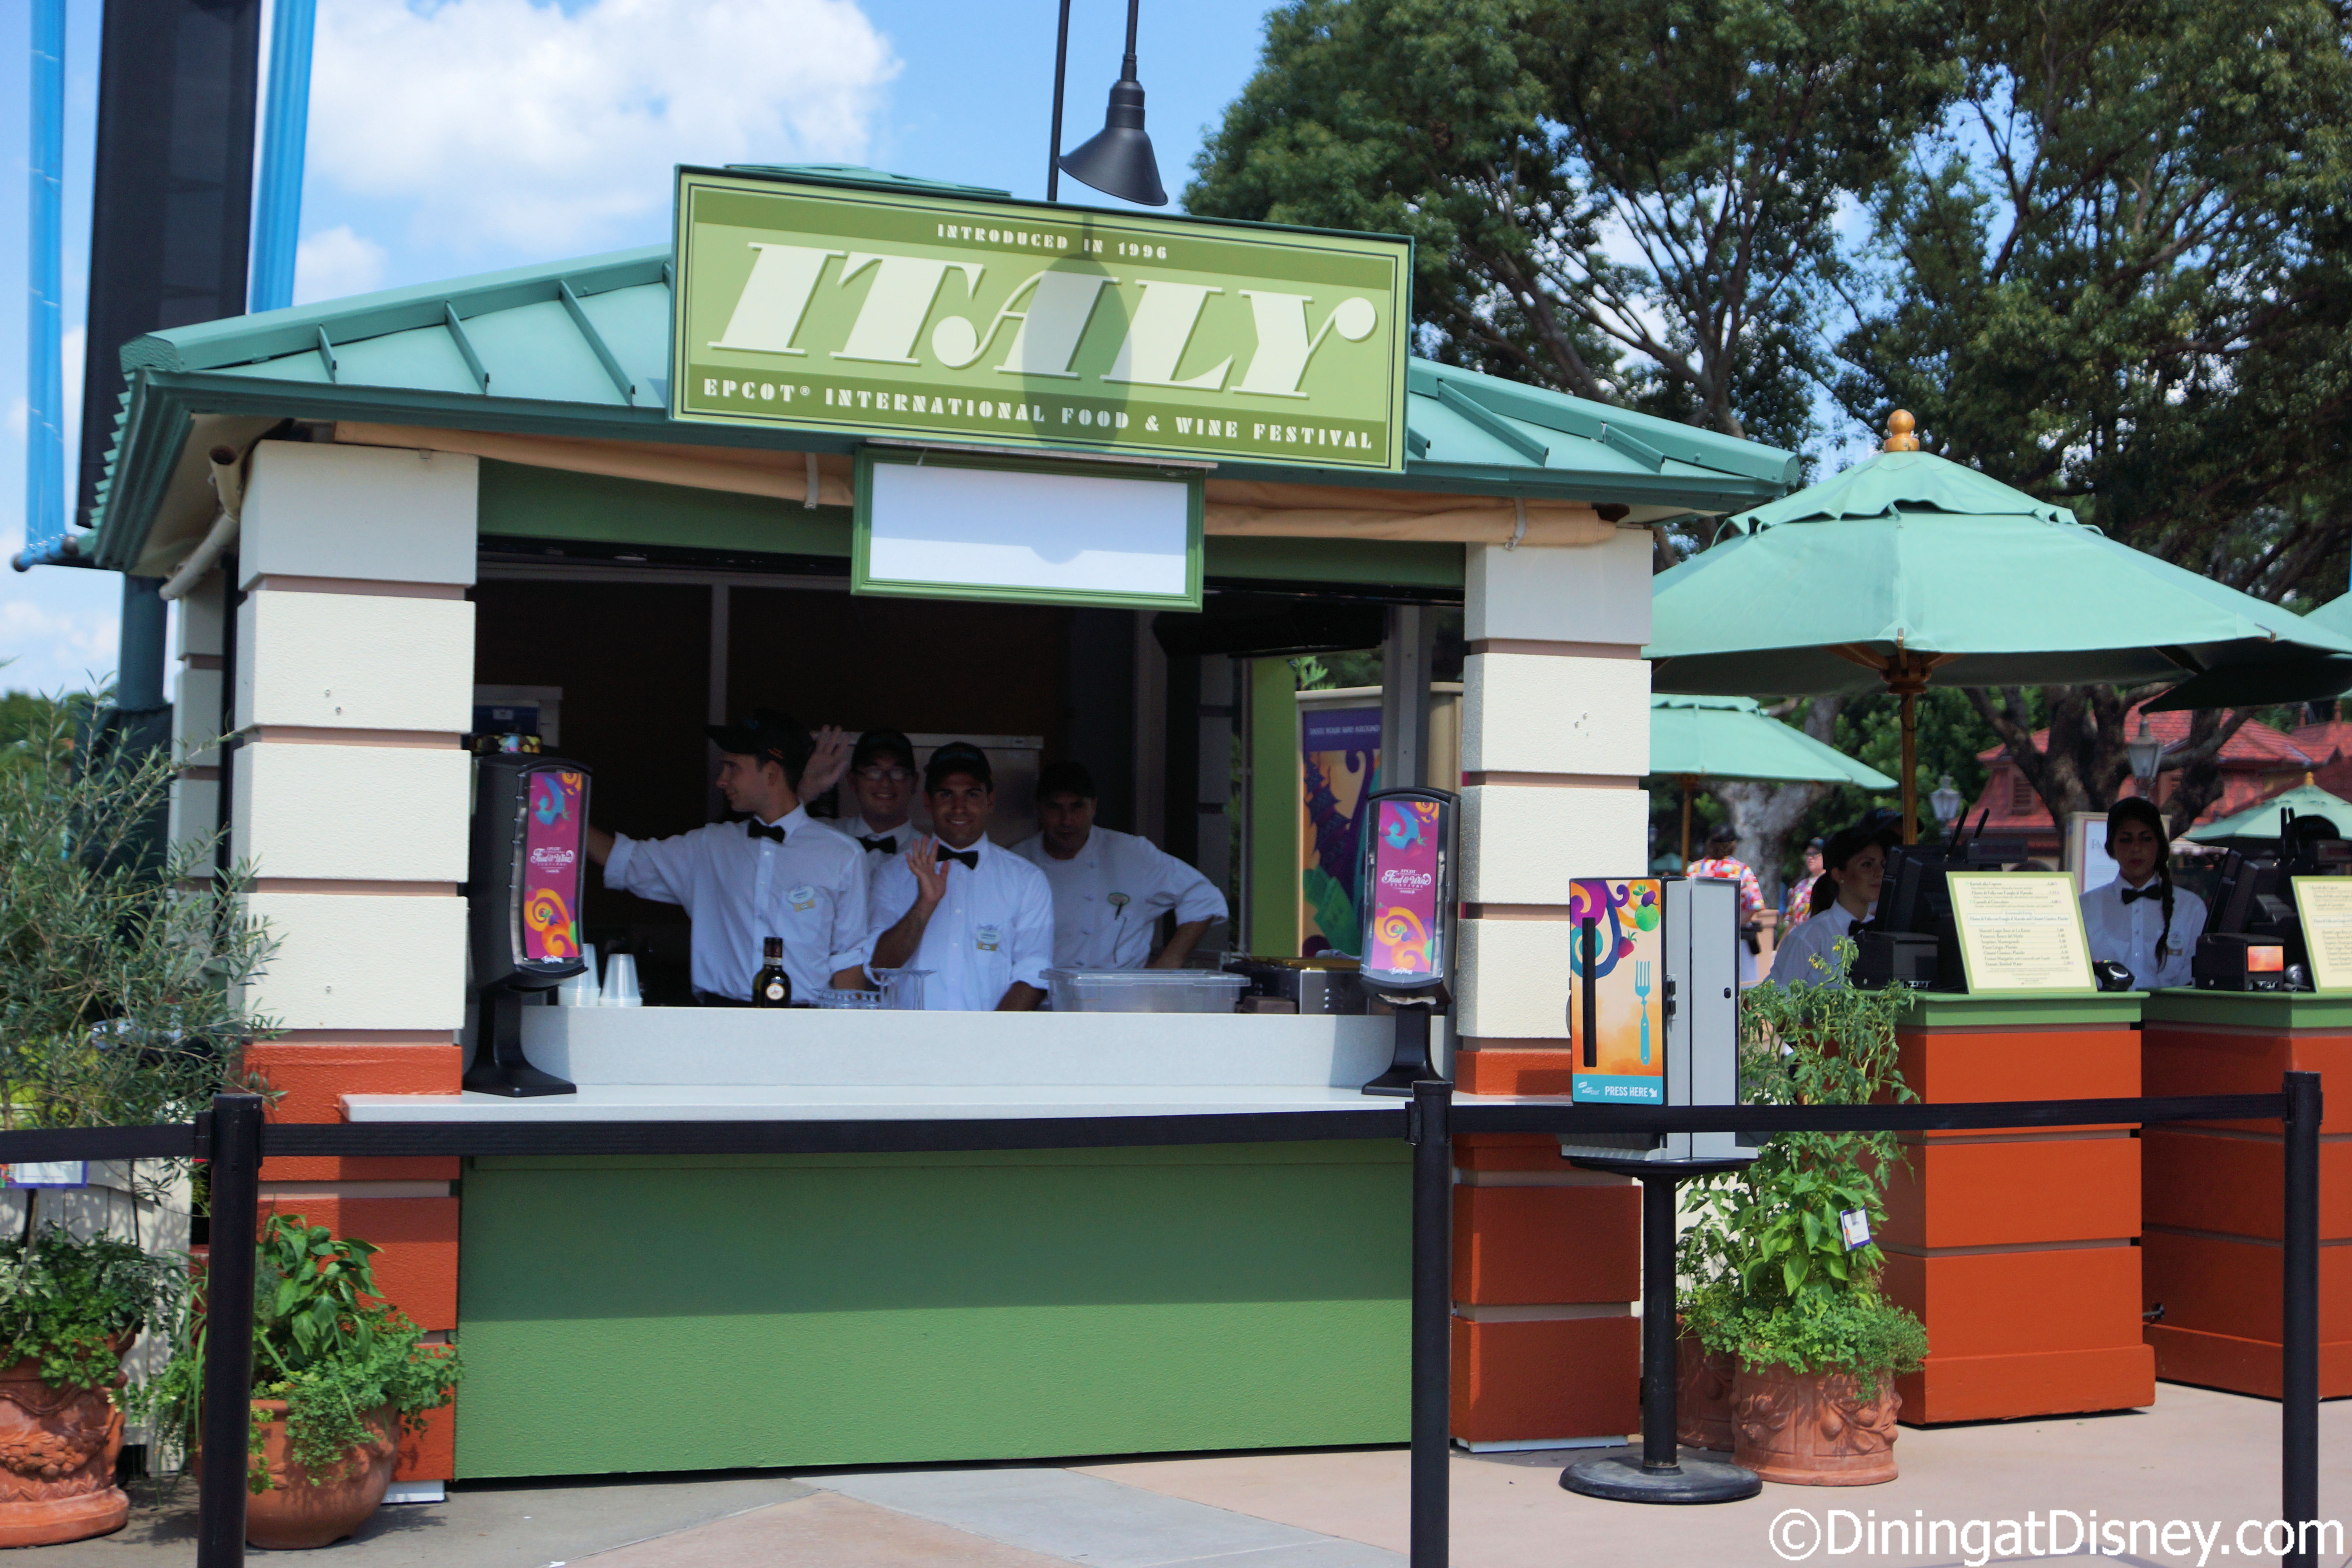 The 2014 Epcot Food and Wine Festival Italy booth